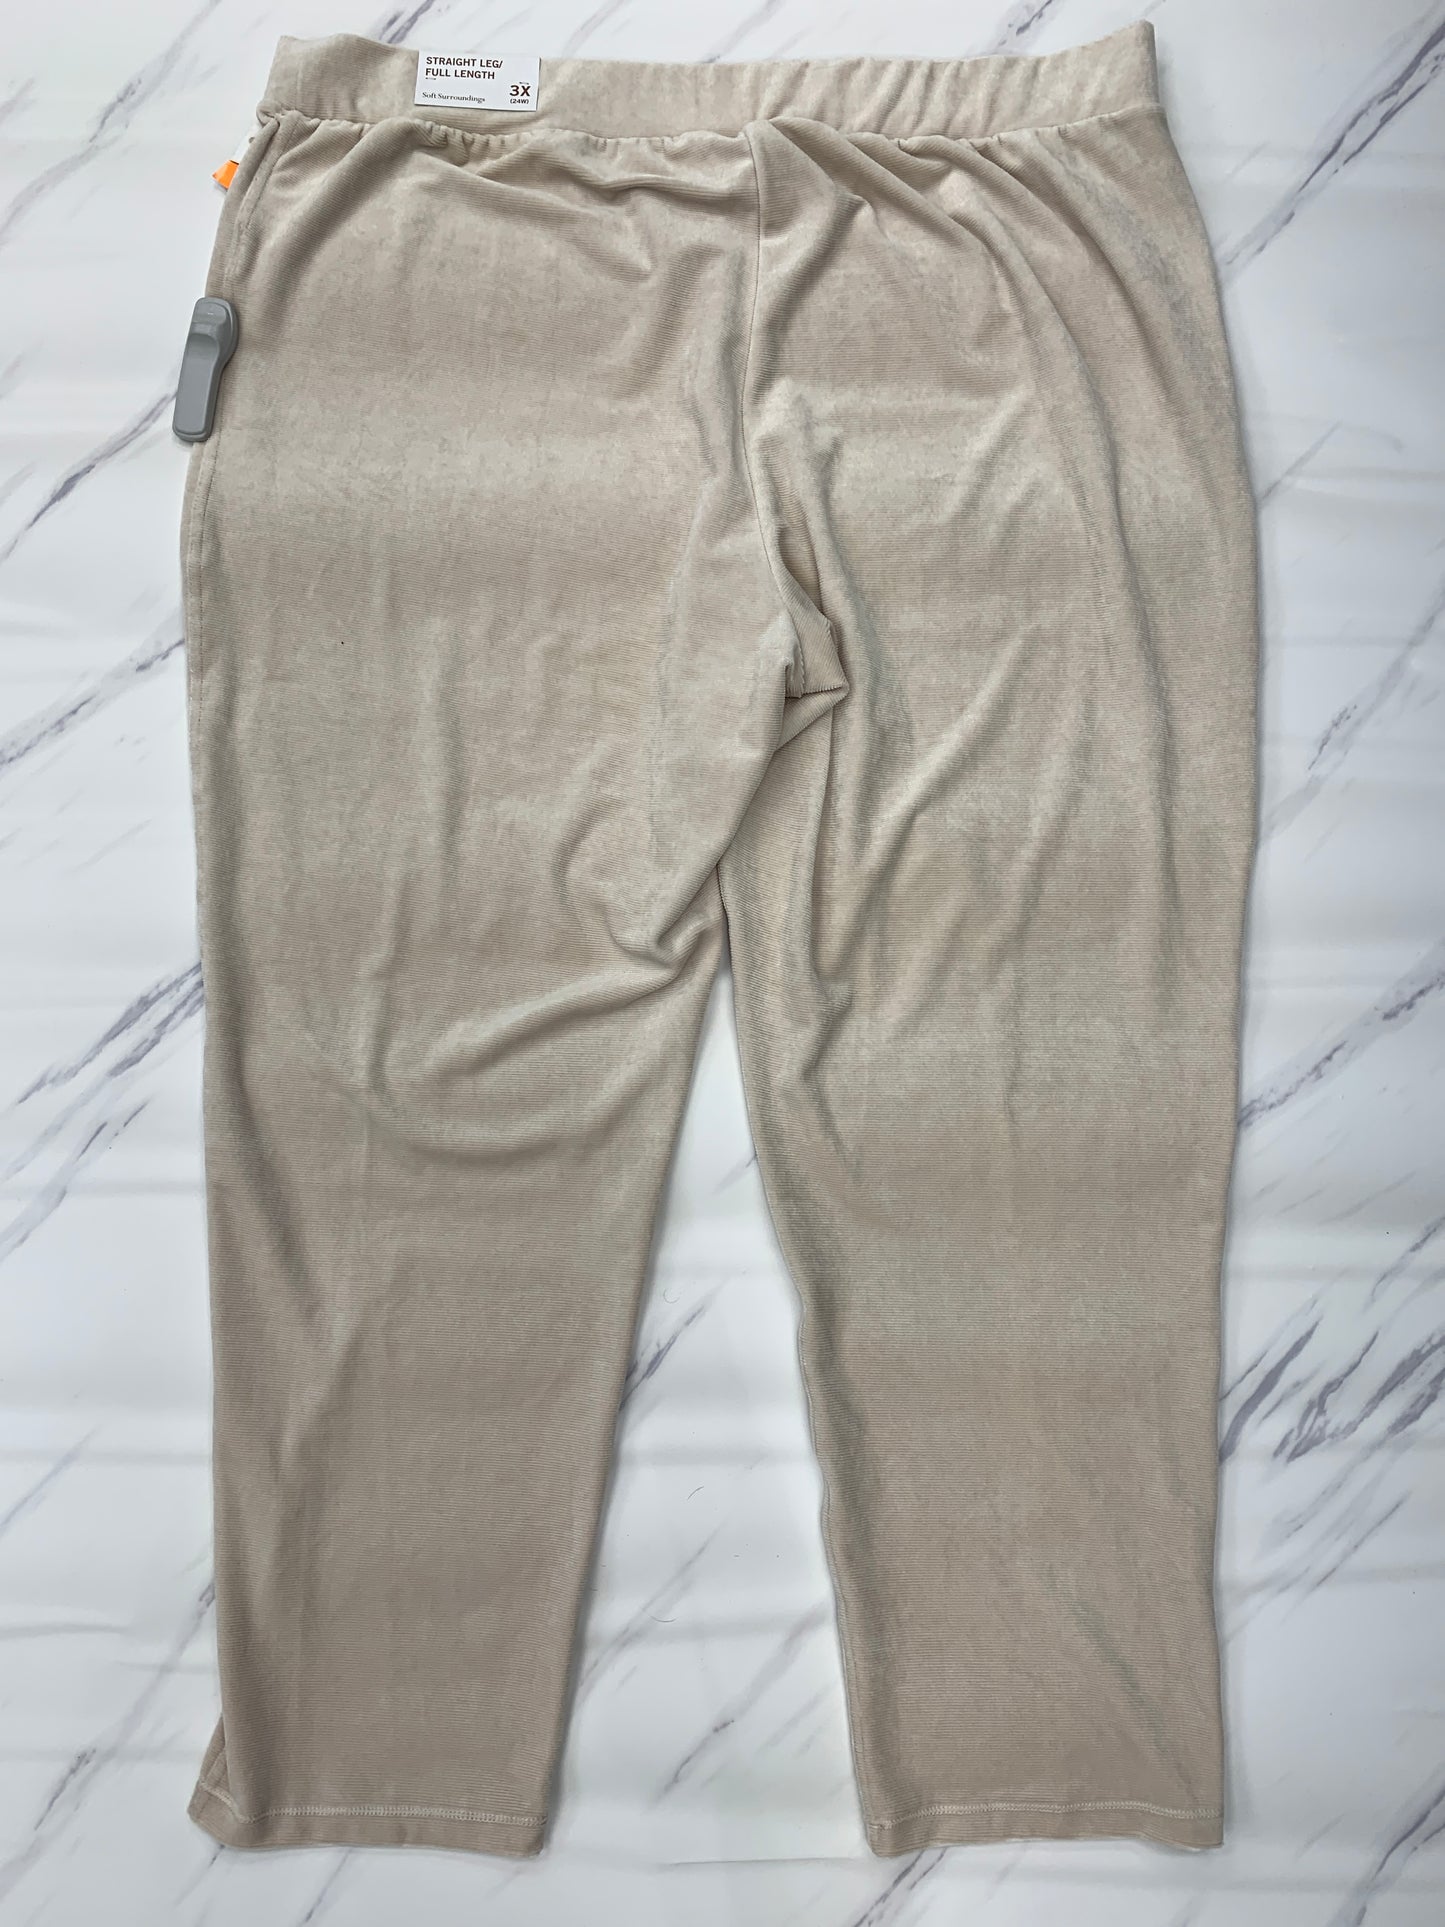 Pants Ankle By Soft Surroundings  Size: 3x